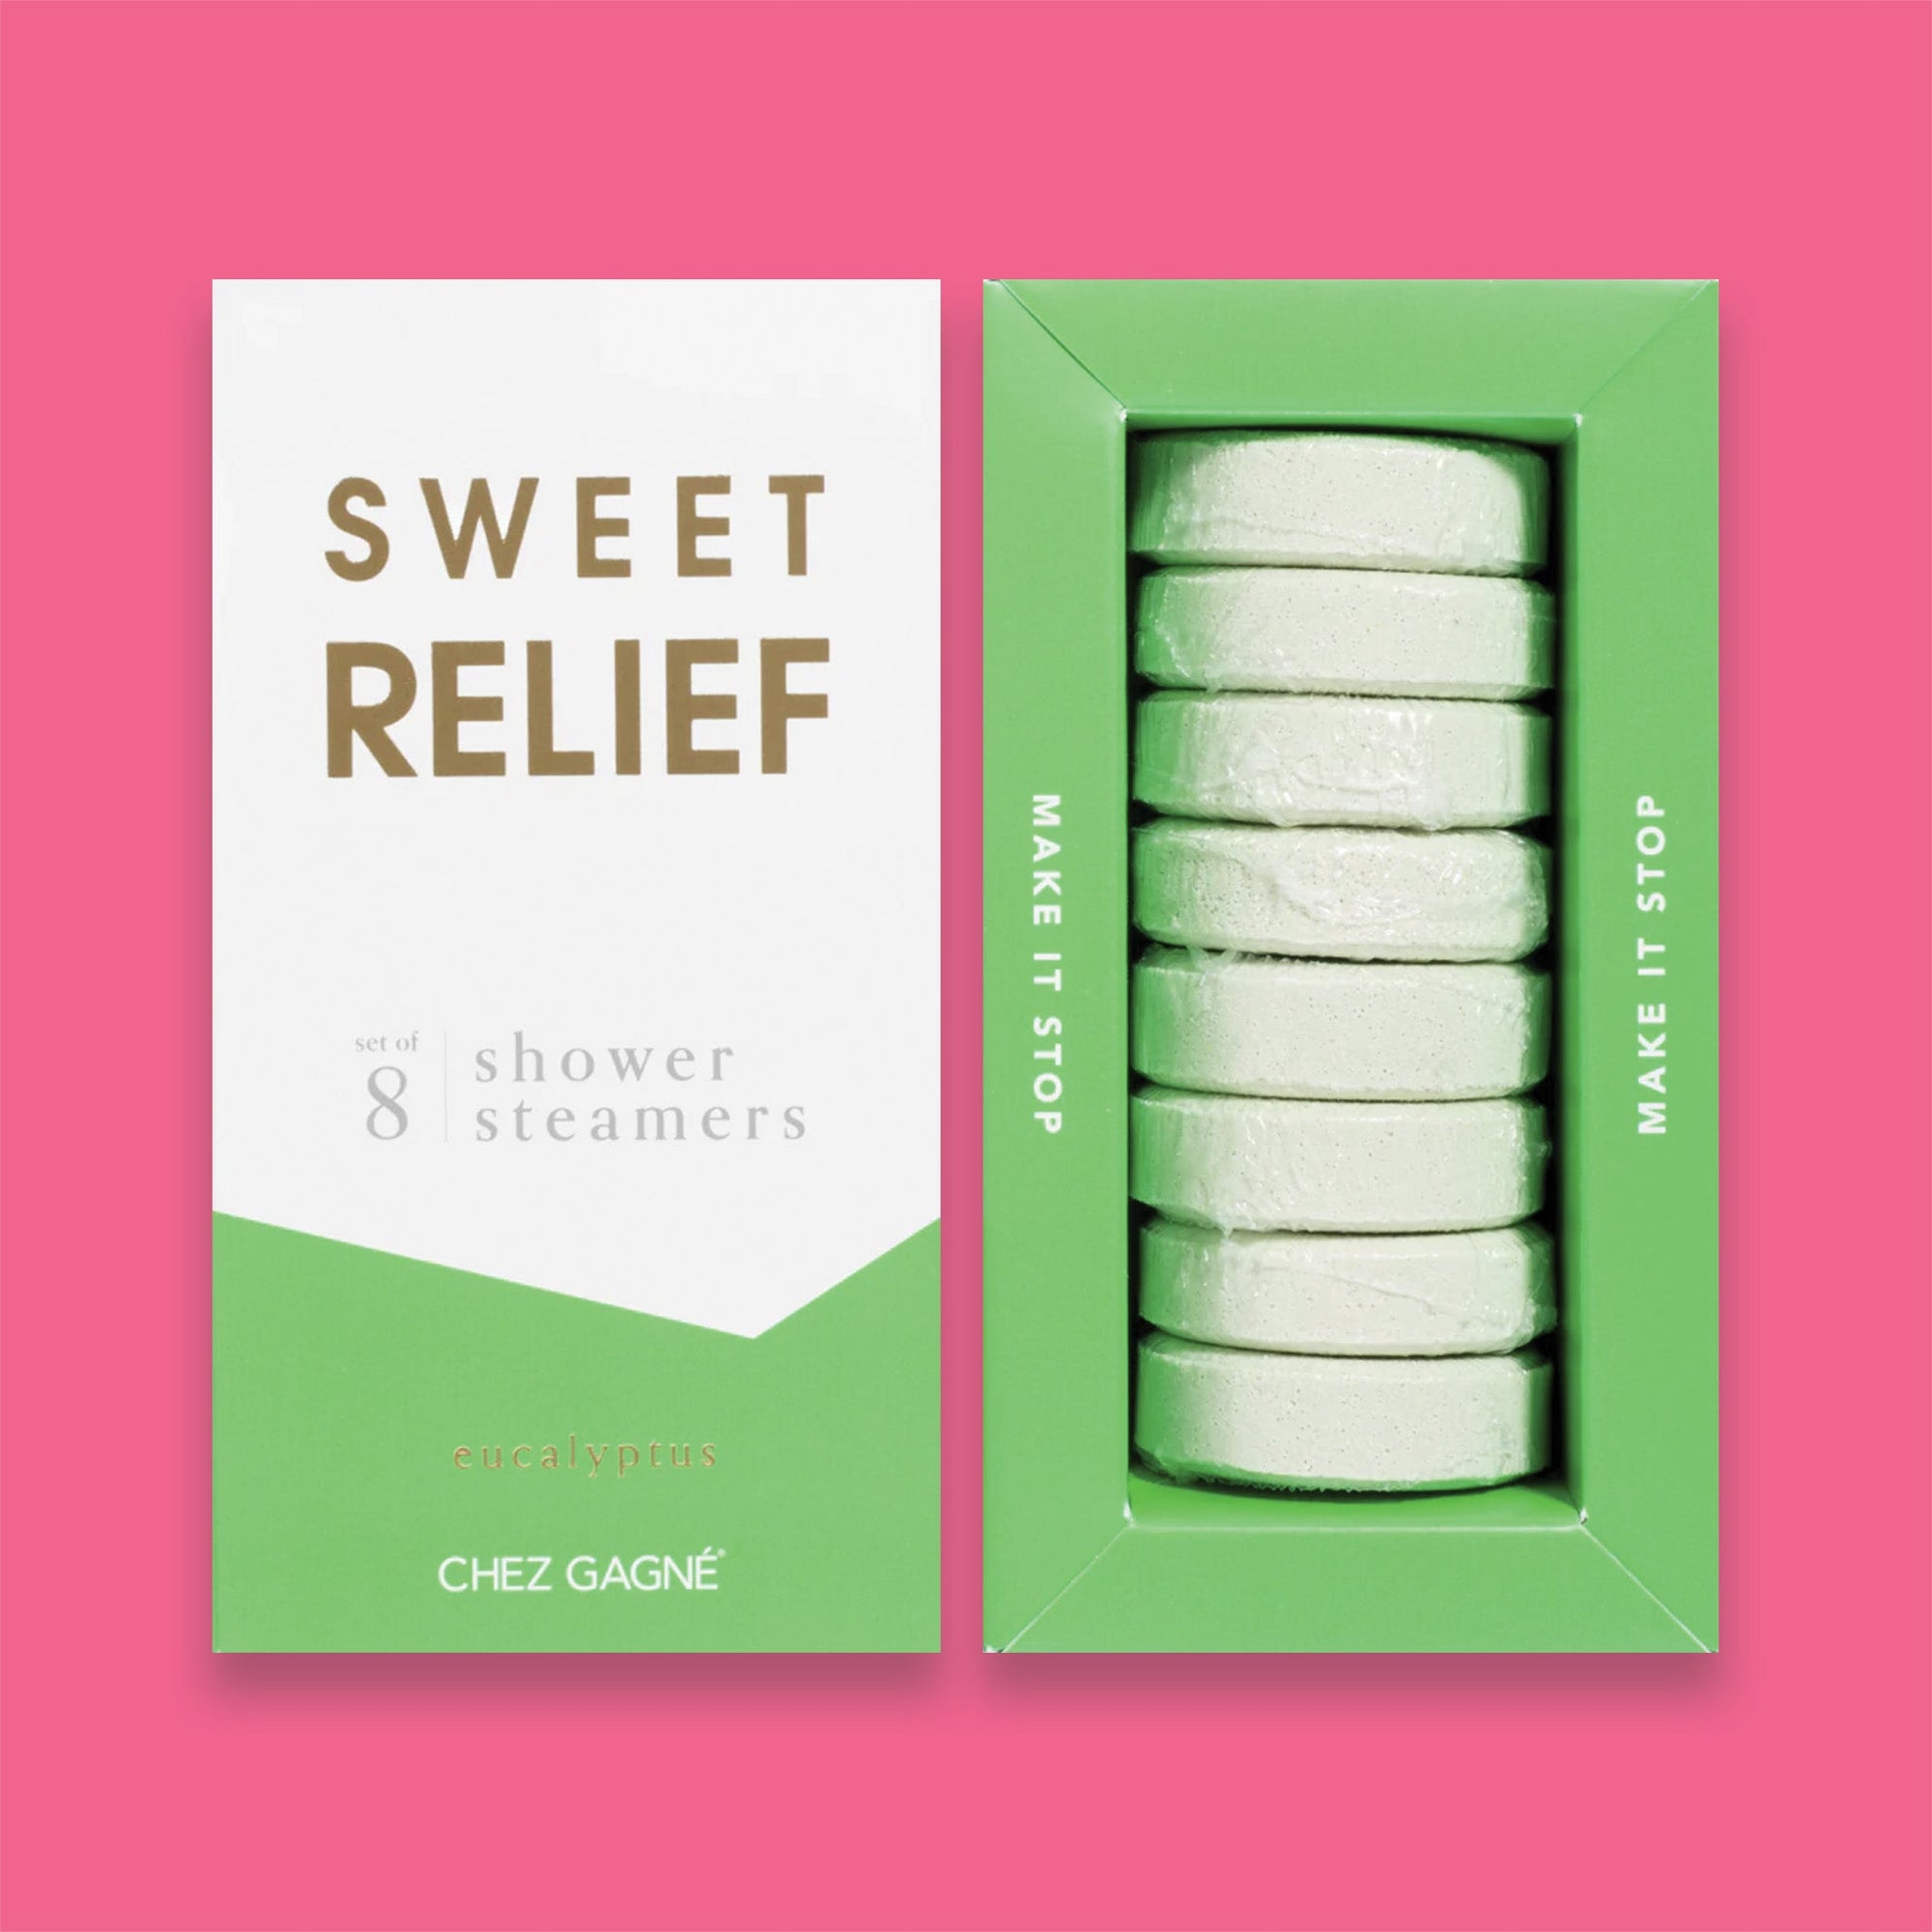 On a hot pink background sits two boxes. This picture is a close-up of a white and lime green package that says "SWEET RELIEF" in gold foil, all caps block lettering. Under it says "set of 8" and " shower steamers" in grey, lowercase serif font. At the bottom it says "eucalyptus" in gold foil, lower case serif font. To the right of it is a lime green box with white shower steamers in it. 